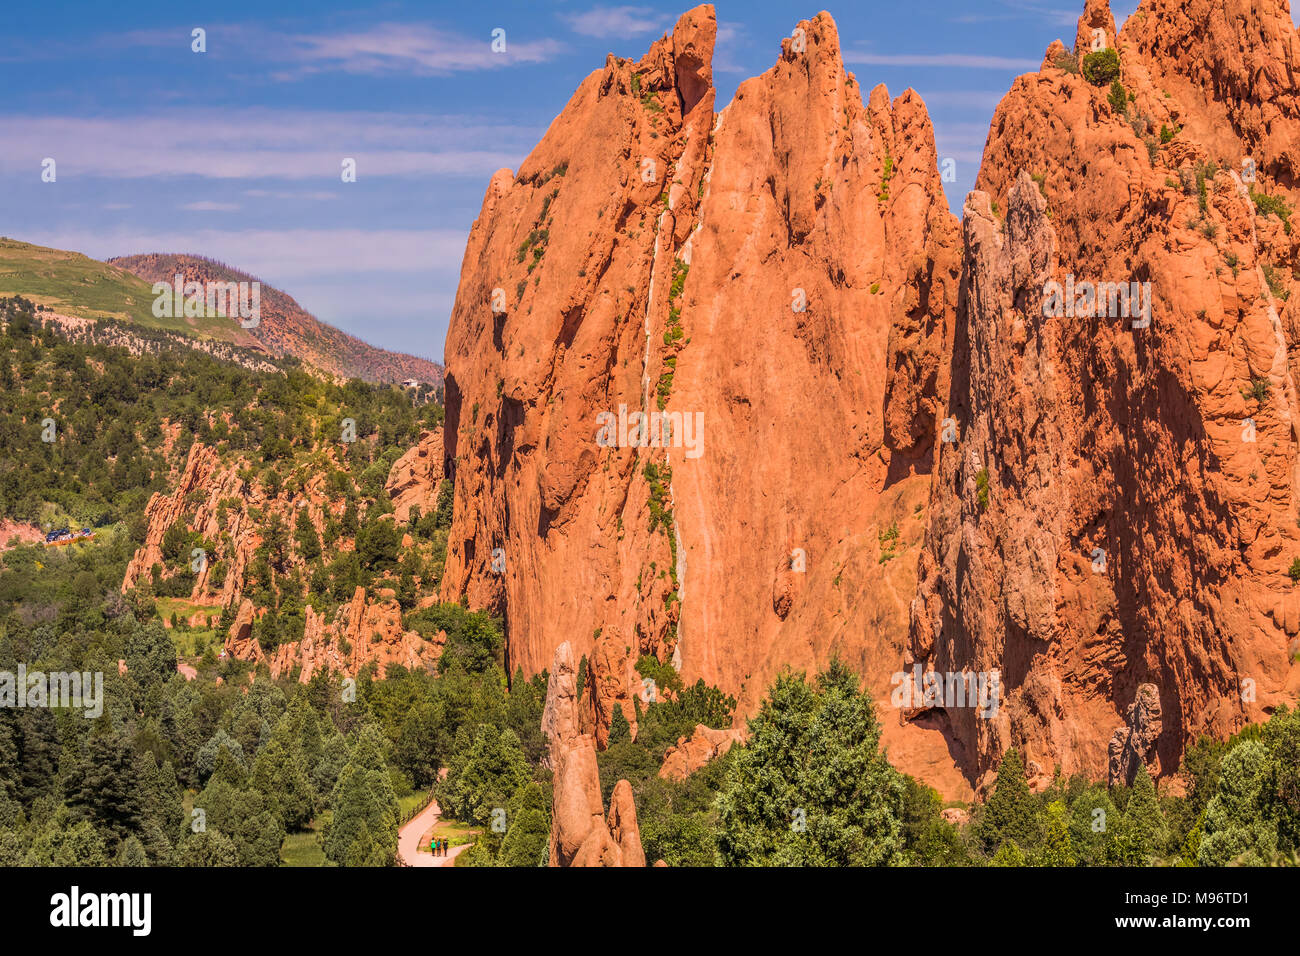 View of whimsical rock formations in Garden of the Gods park, Colorado Springs, Colorado; on the bottom, tiny figures of people walking on the ground Stock Photo